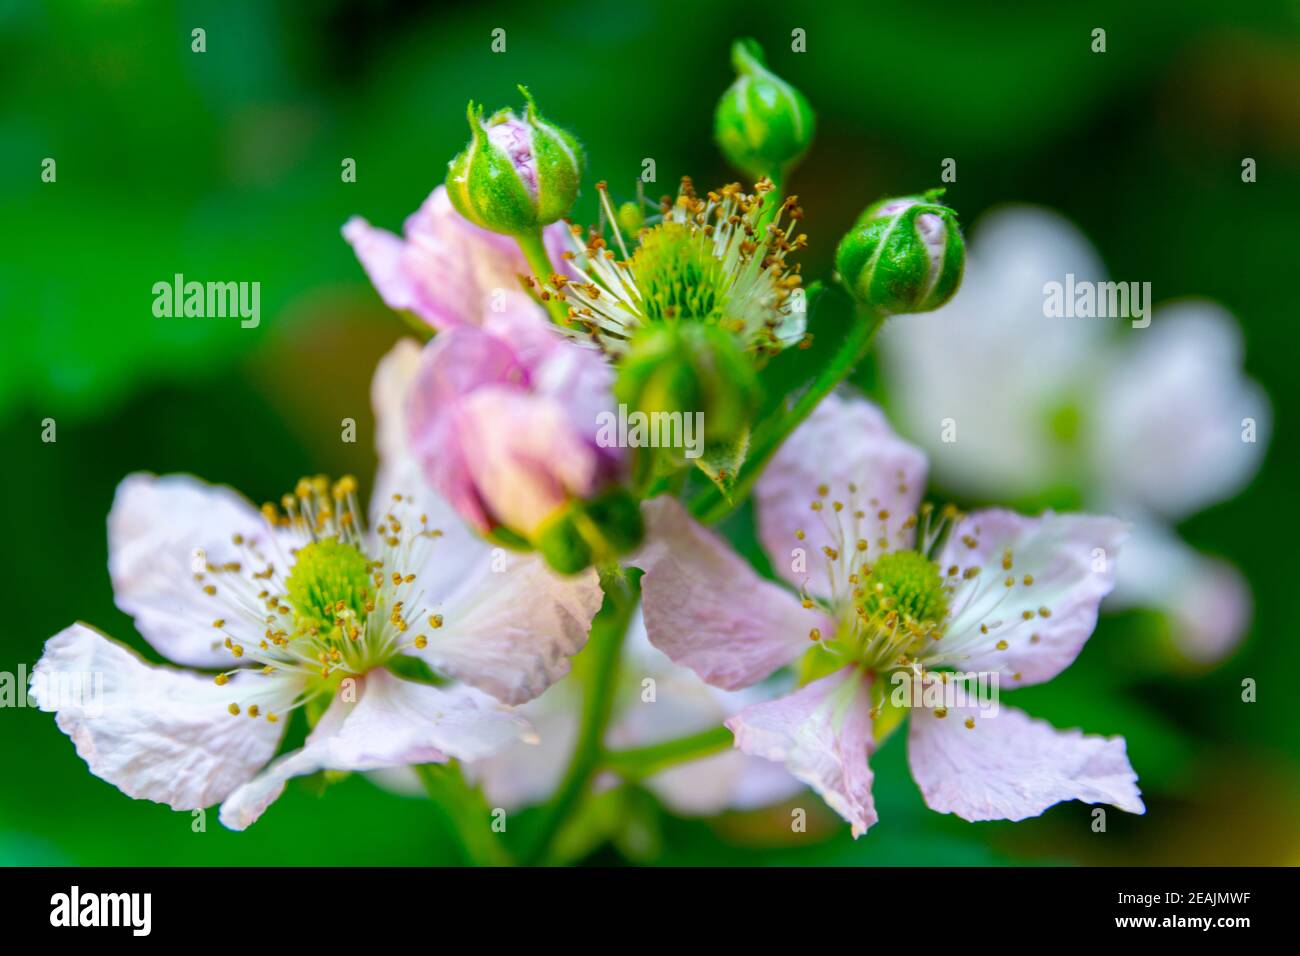 Framboise flower heads during sprintime. Macro shot, detail and close-up Stock Photo